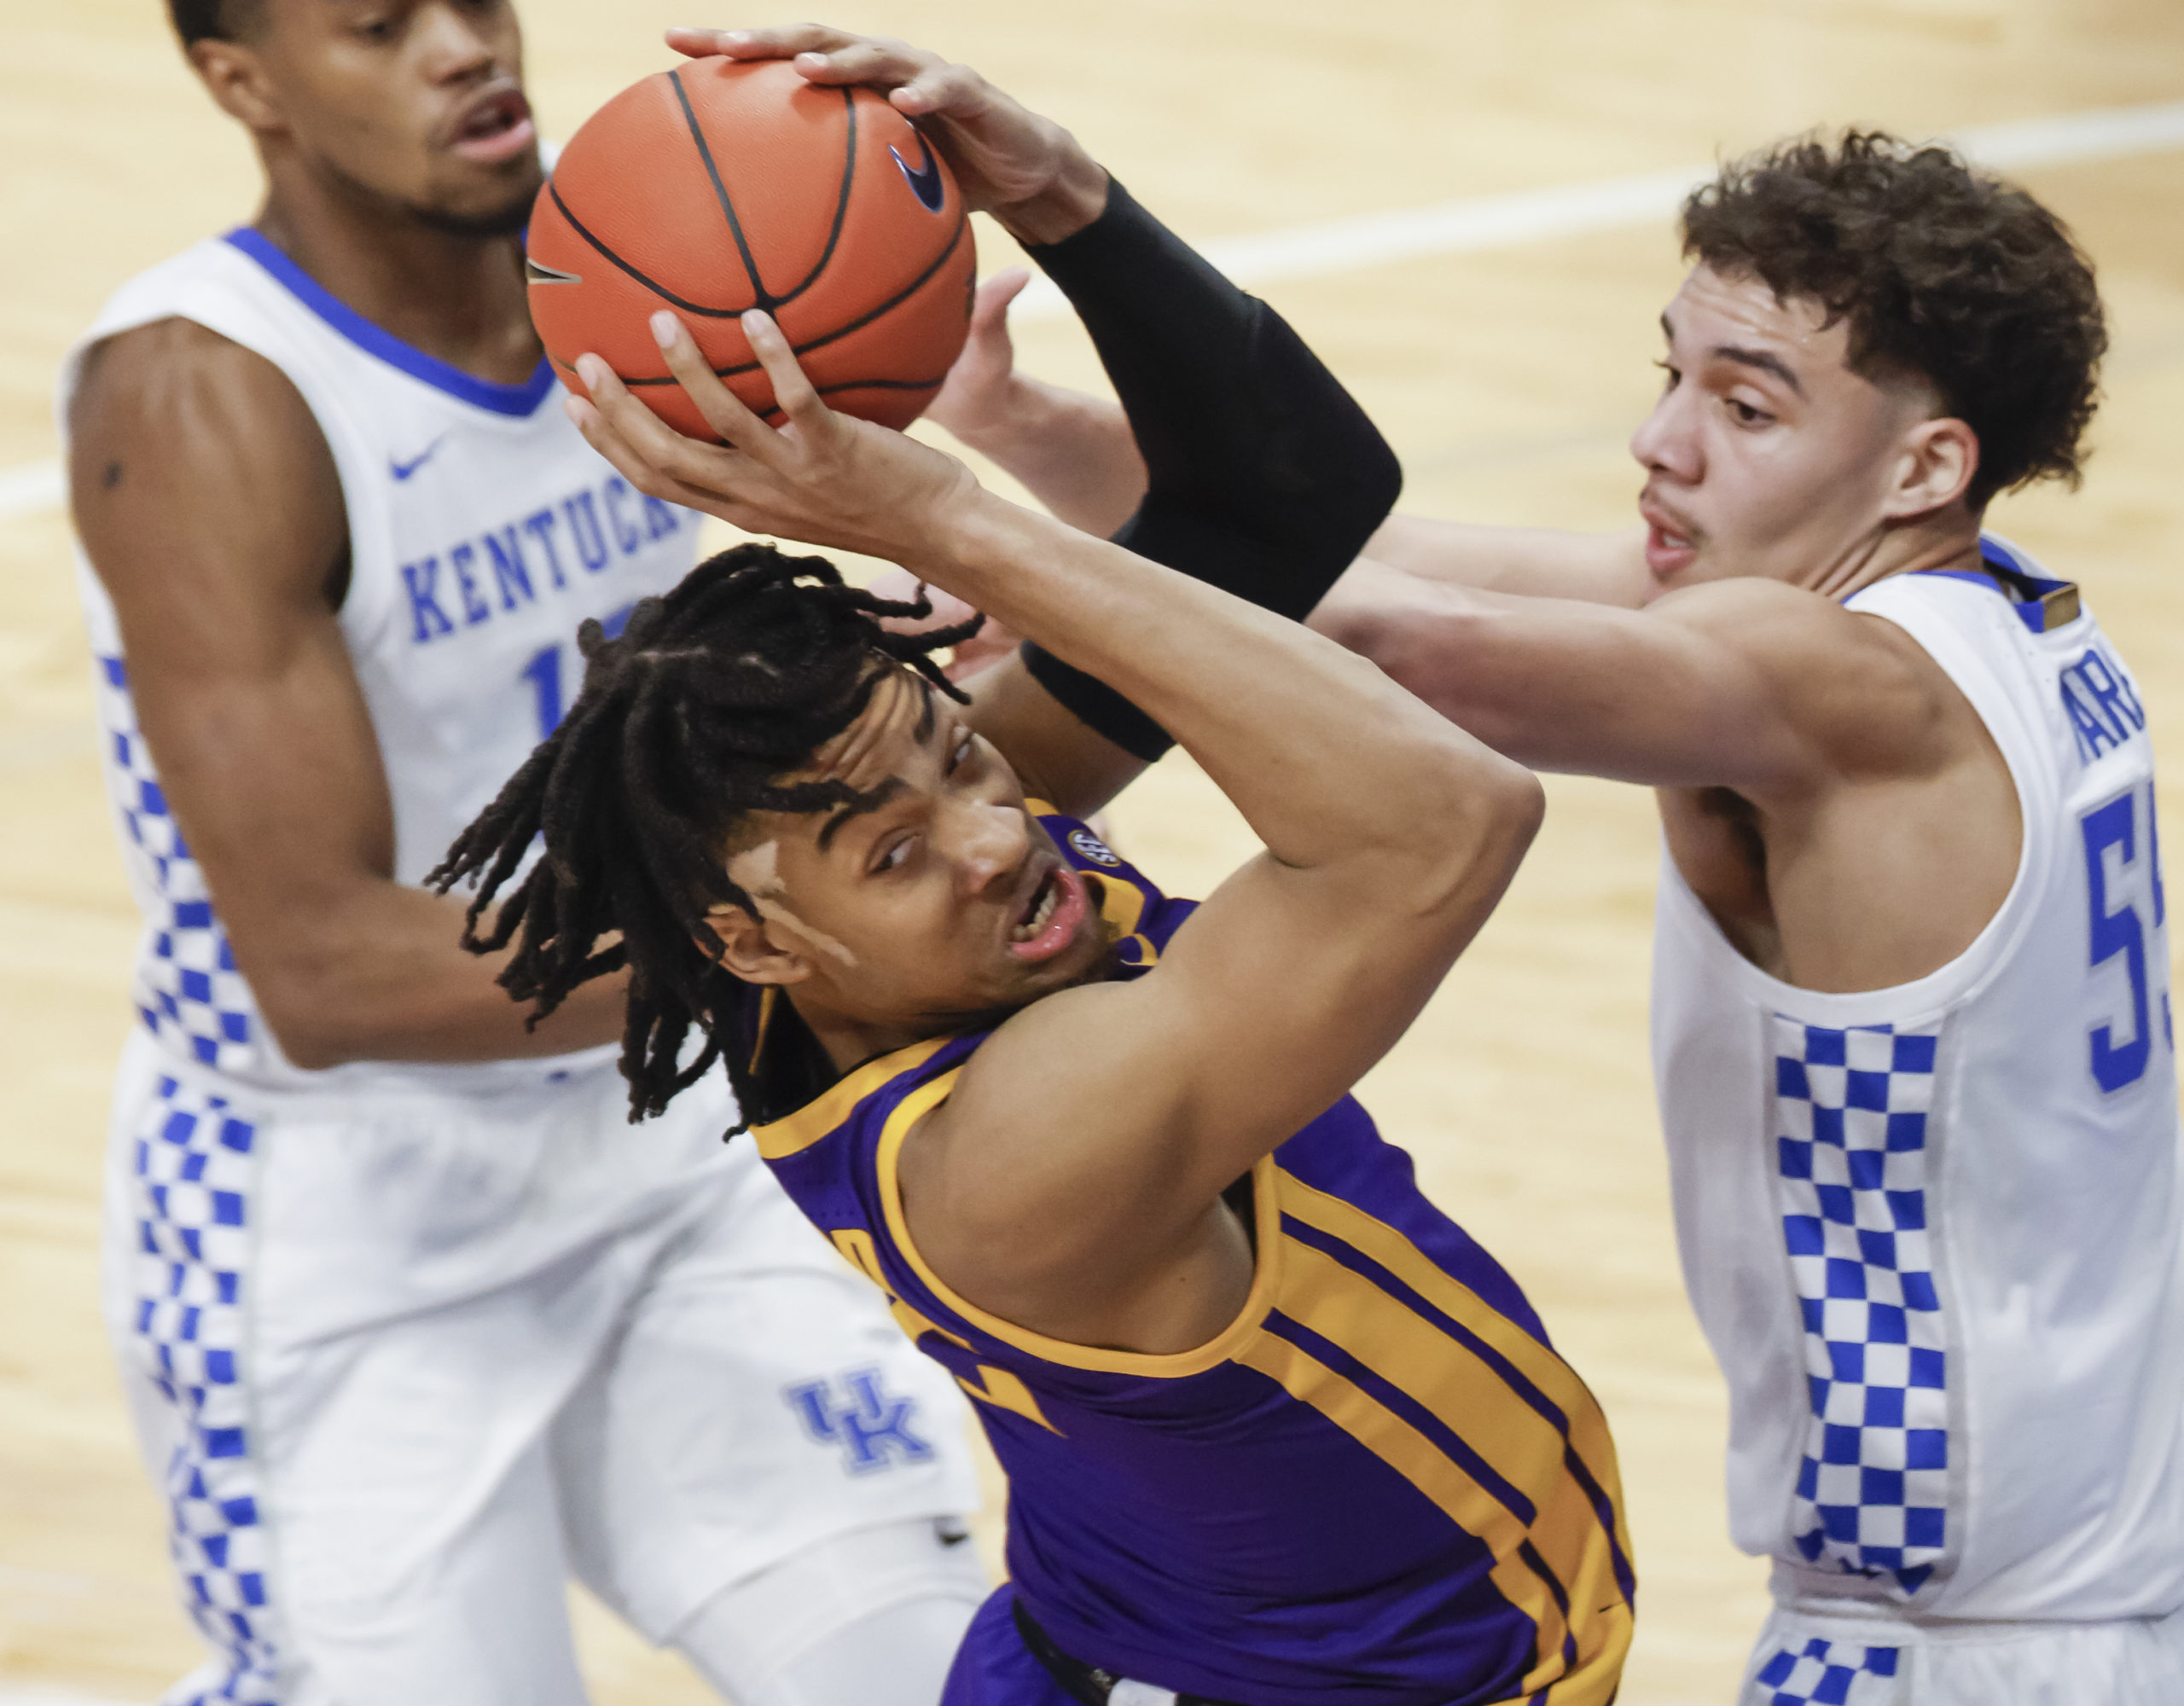 LEXINGTON, KY - JANUARY 23: Trendon Watford #2 of the LSU Tigers looks for an teammate to pass the ball off as Lance Ware #55 of the Kentucky Wildcats defends during the first half at Rupp Arena on January 23, 2021 in Lexington, Kentucky. (Photo by Michael Hickey/Getty Images)